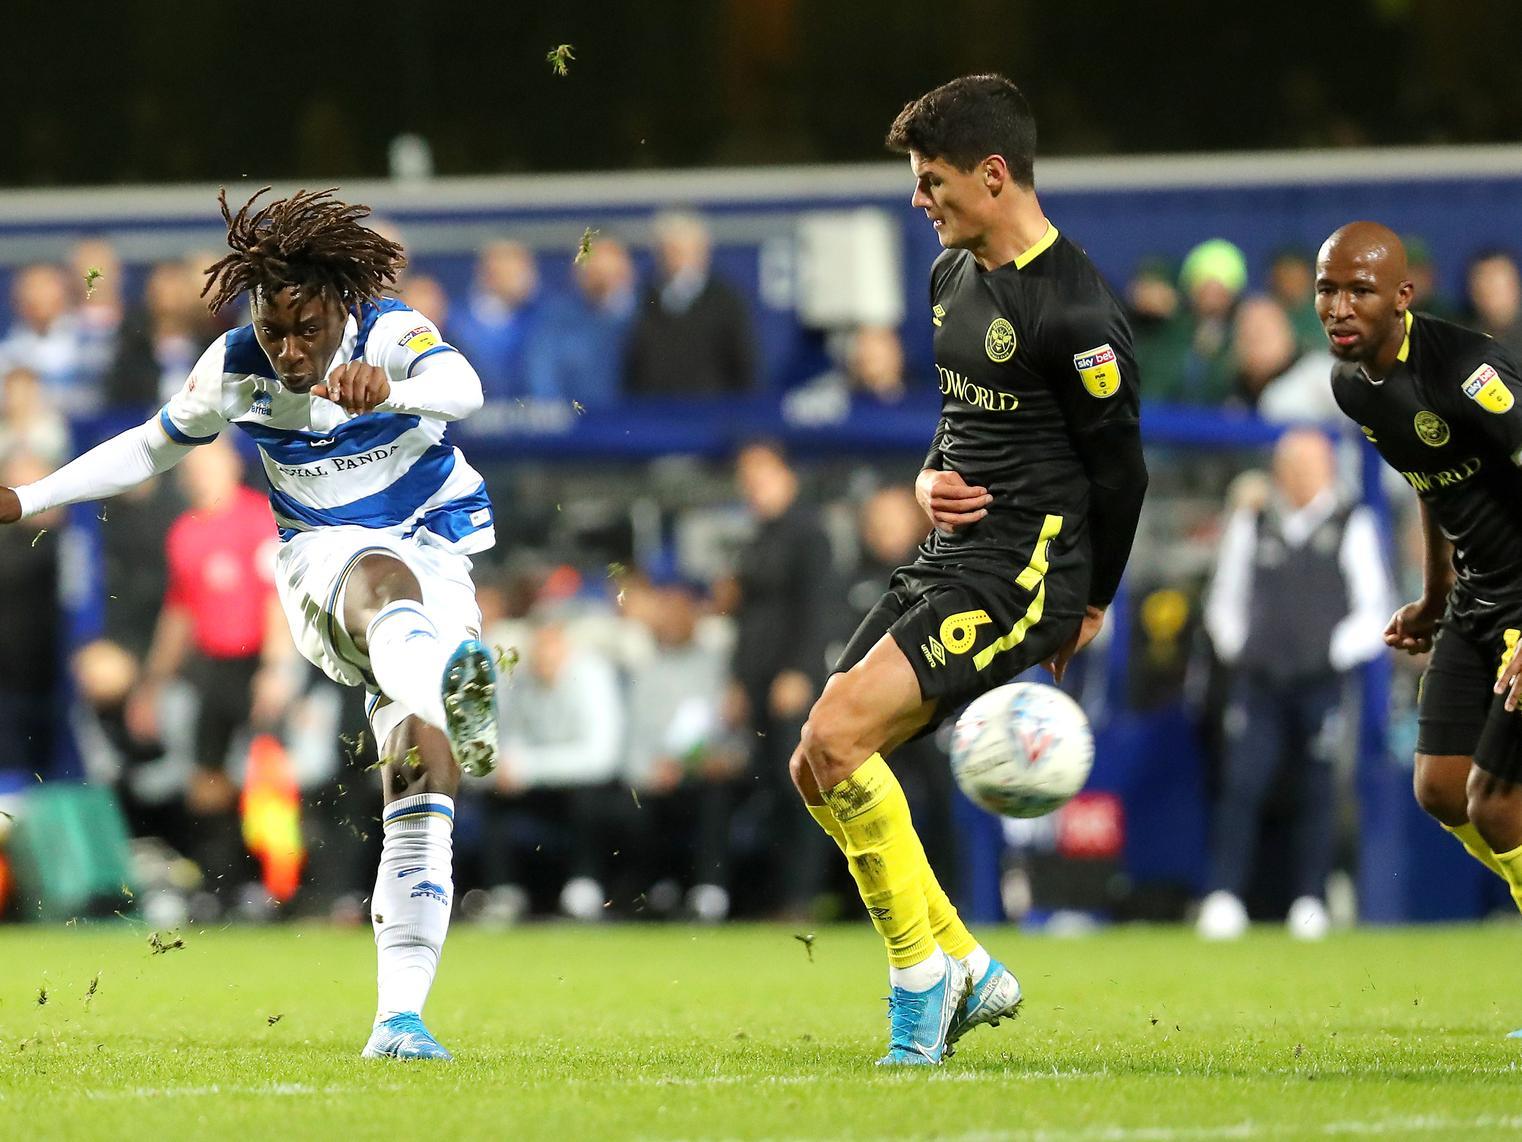 Leeds United are unlikely to pursue a January move for QPR sensation Eberechi Eze, as his club are set to jack up his price to ward off interest after Christmas. (The Athletic)